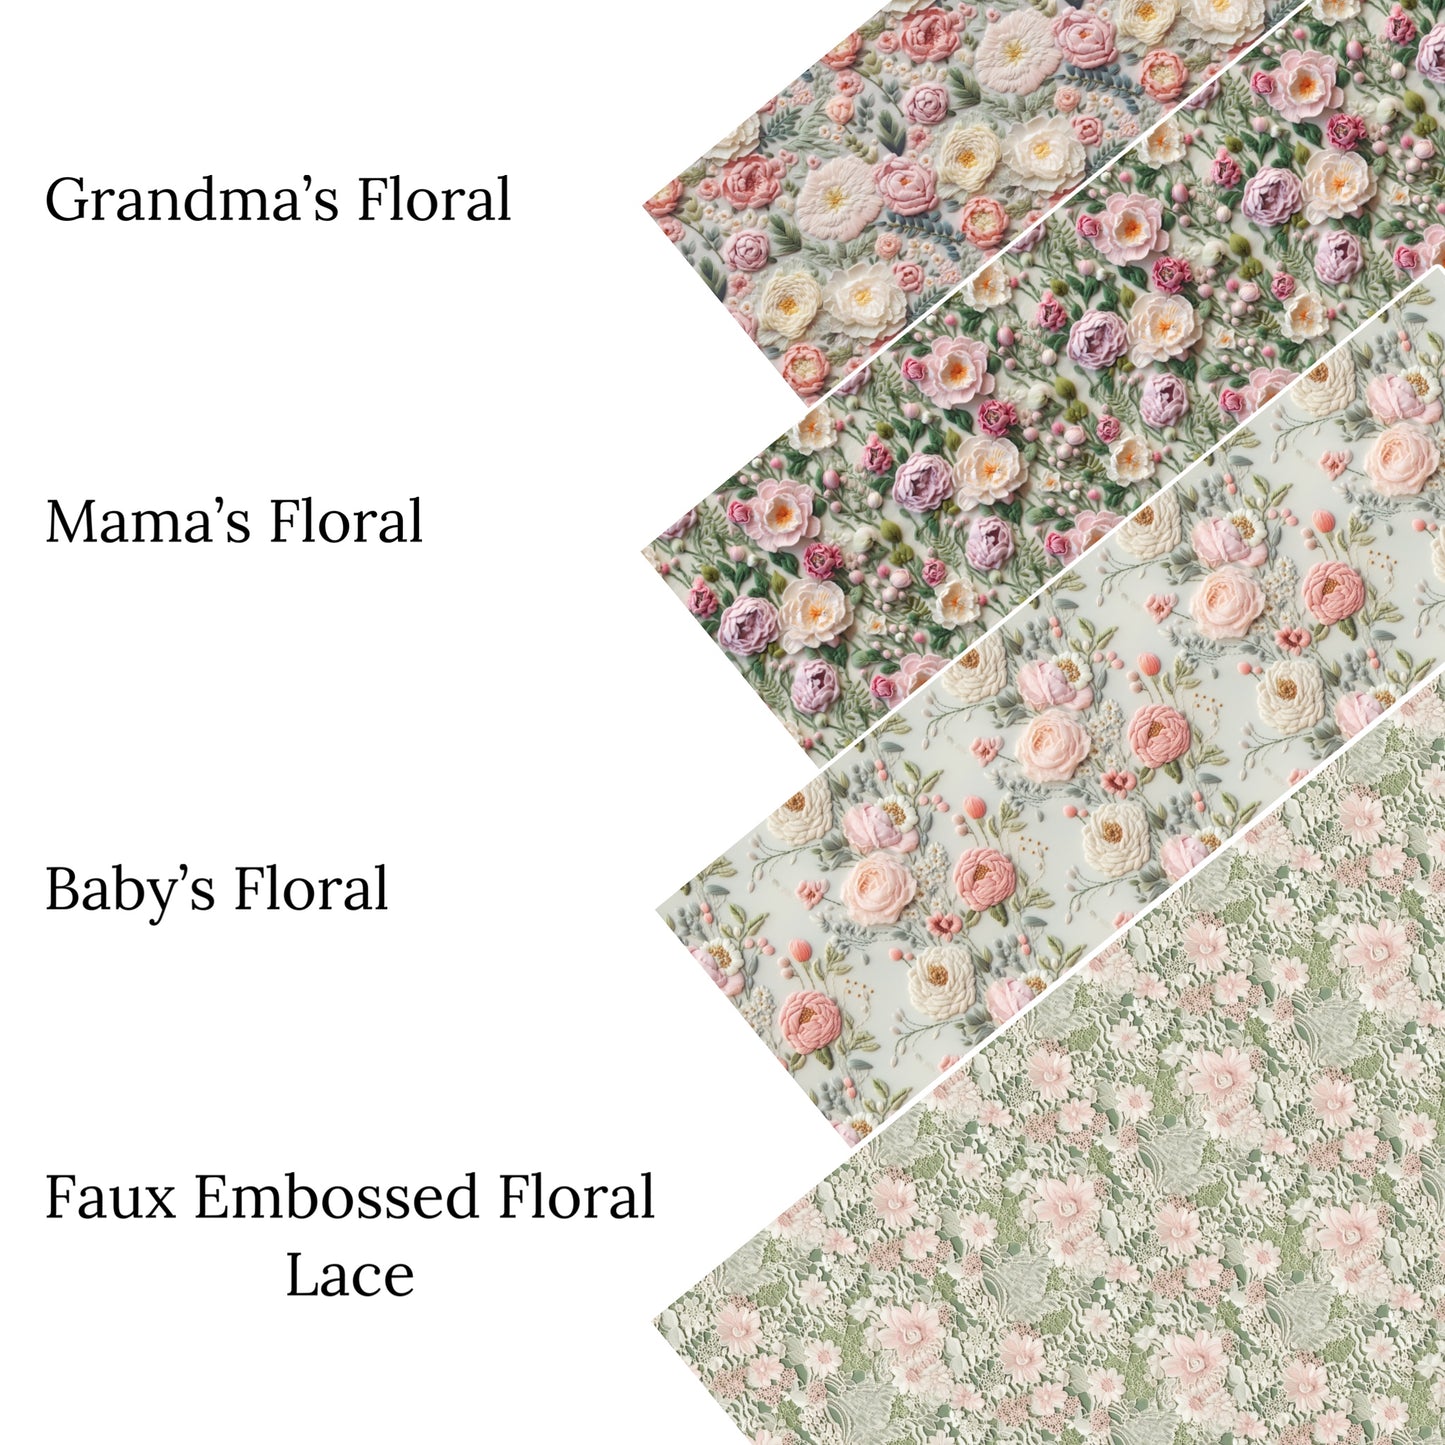 Faux Embossed Floral Lace Faux Leather Sheets